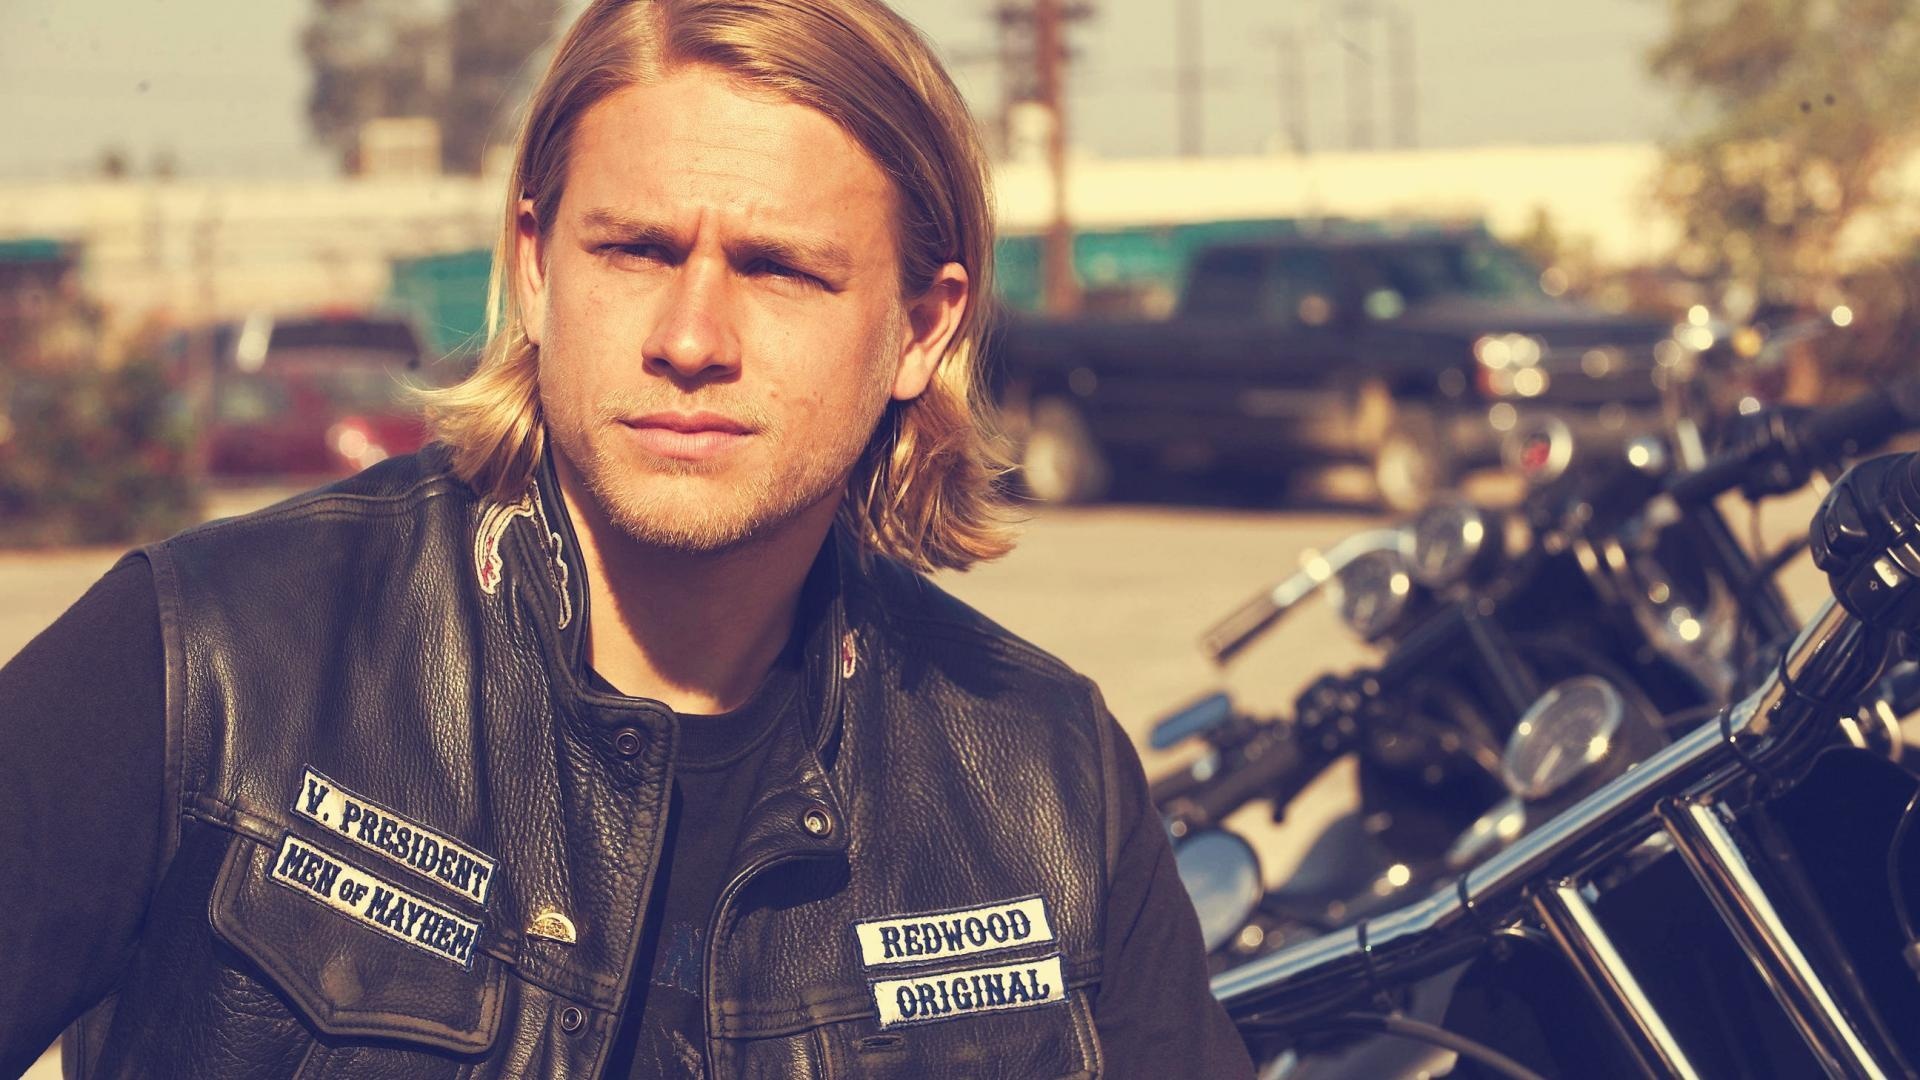 Charlie Hunnam: Best known for his roles in the film Green Street Hooligans. 1920x1080 Full HD Wallpaper.